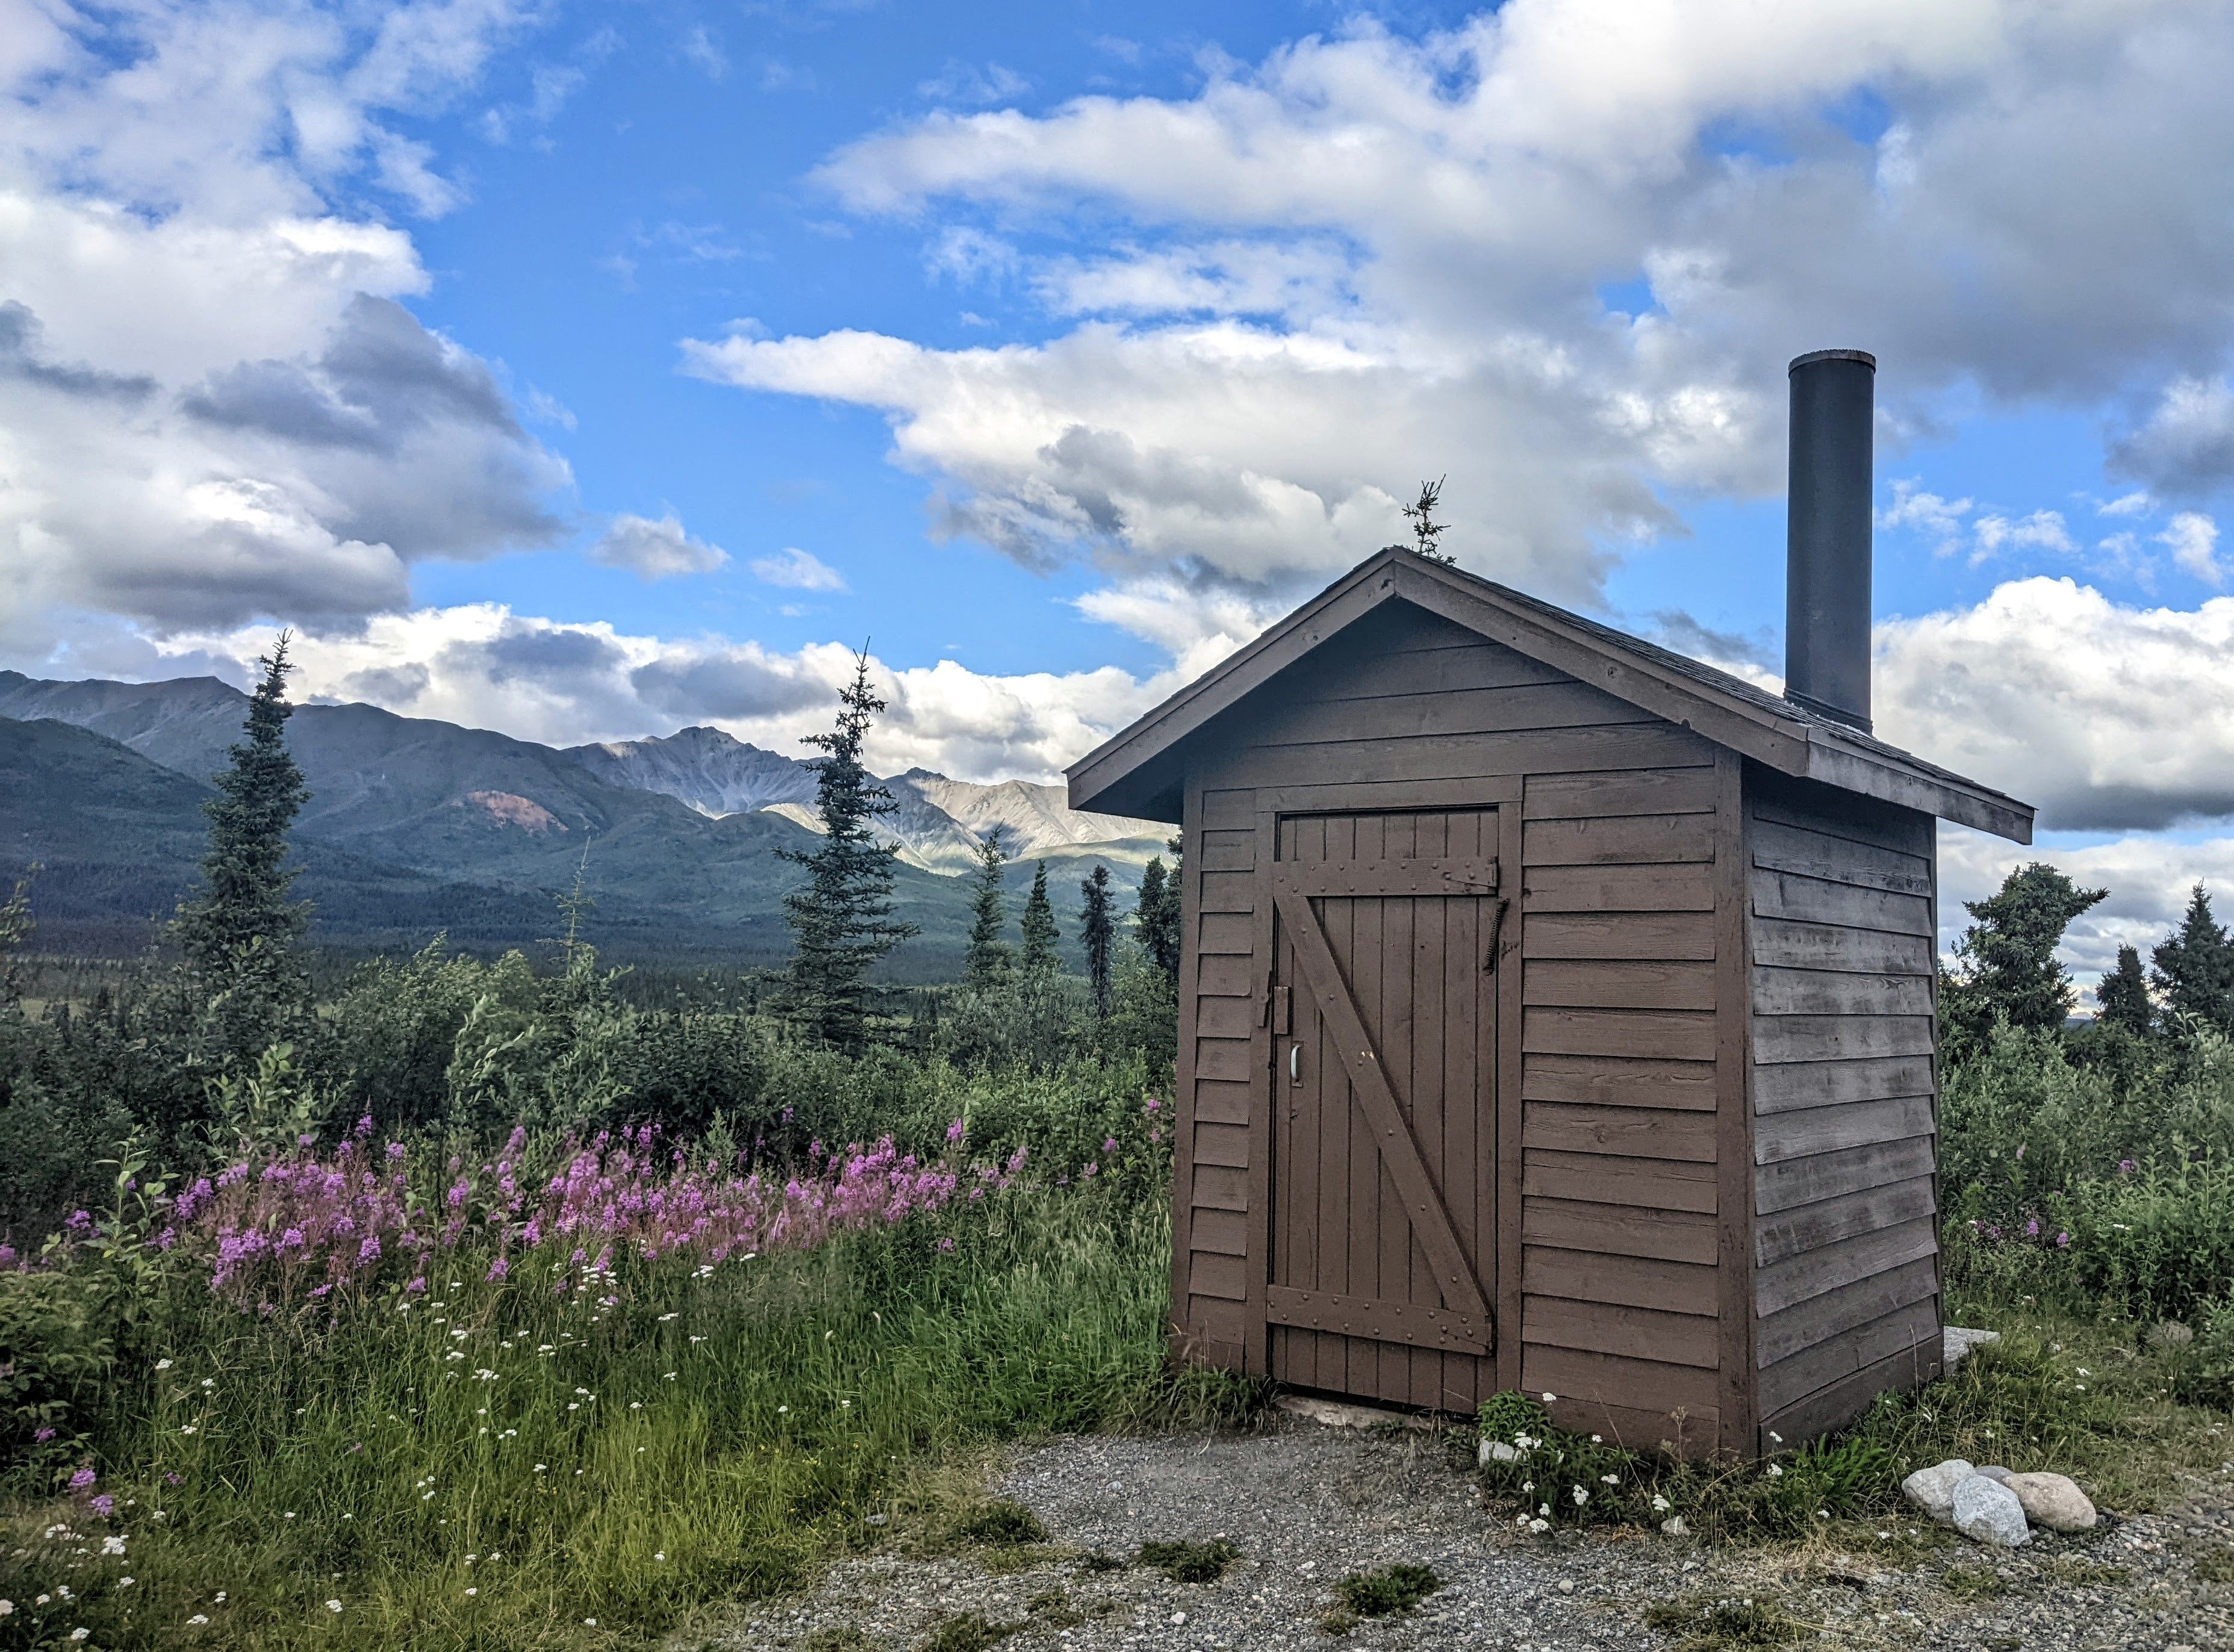 Camper submitted image from Nabesna Road Wrangell St. Elias National Park - 5